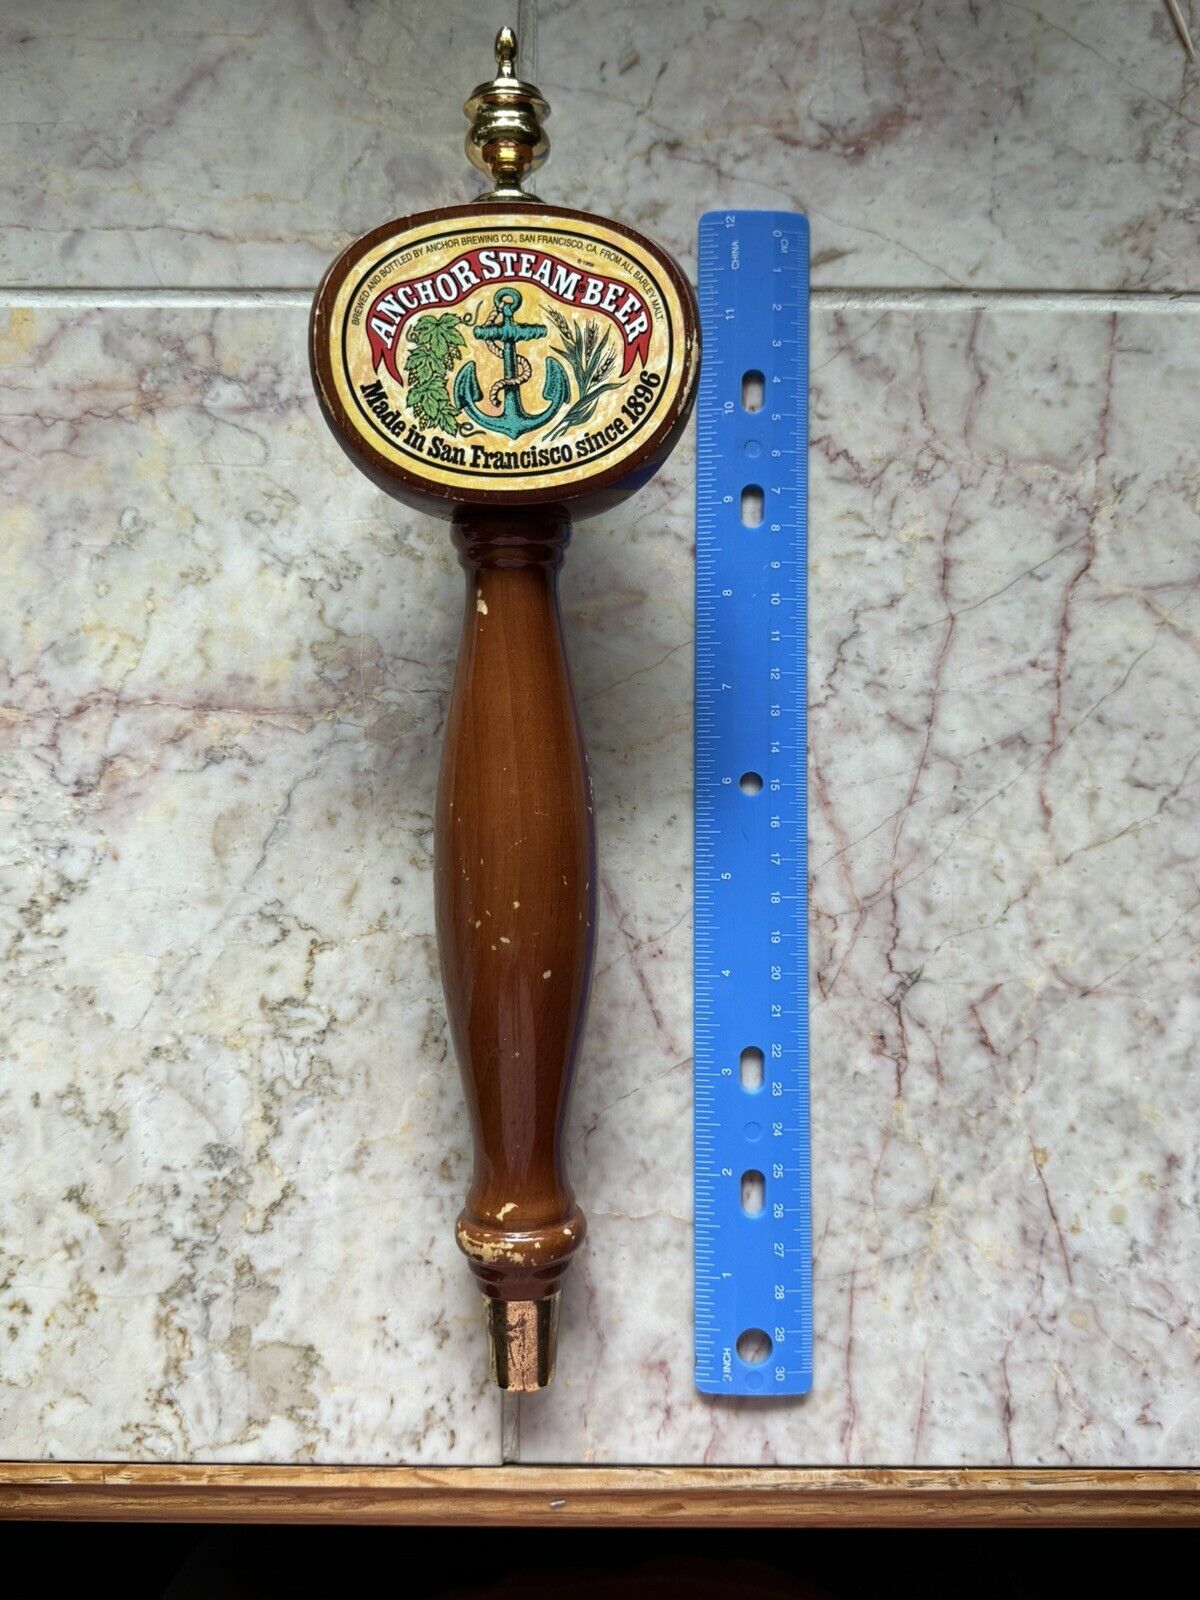 Anchor Steam Brewery Vintage Style Beer Tap Handle San Francisco 